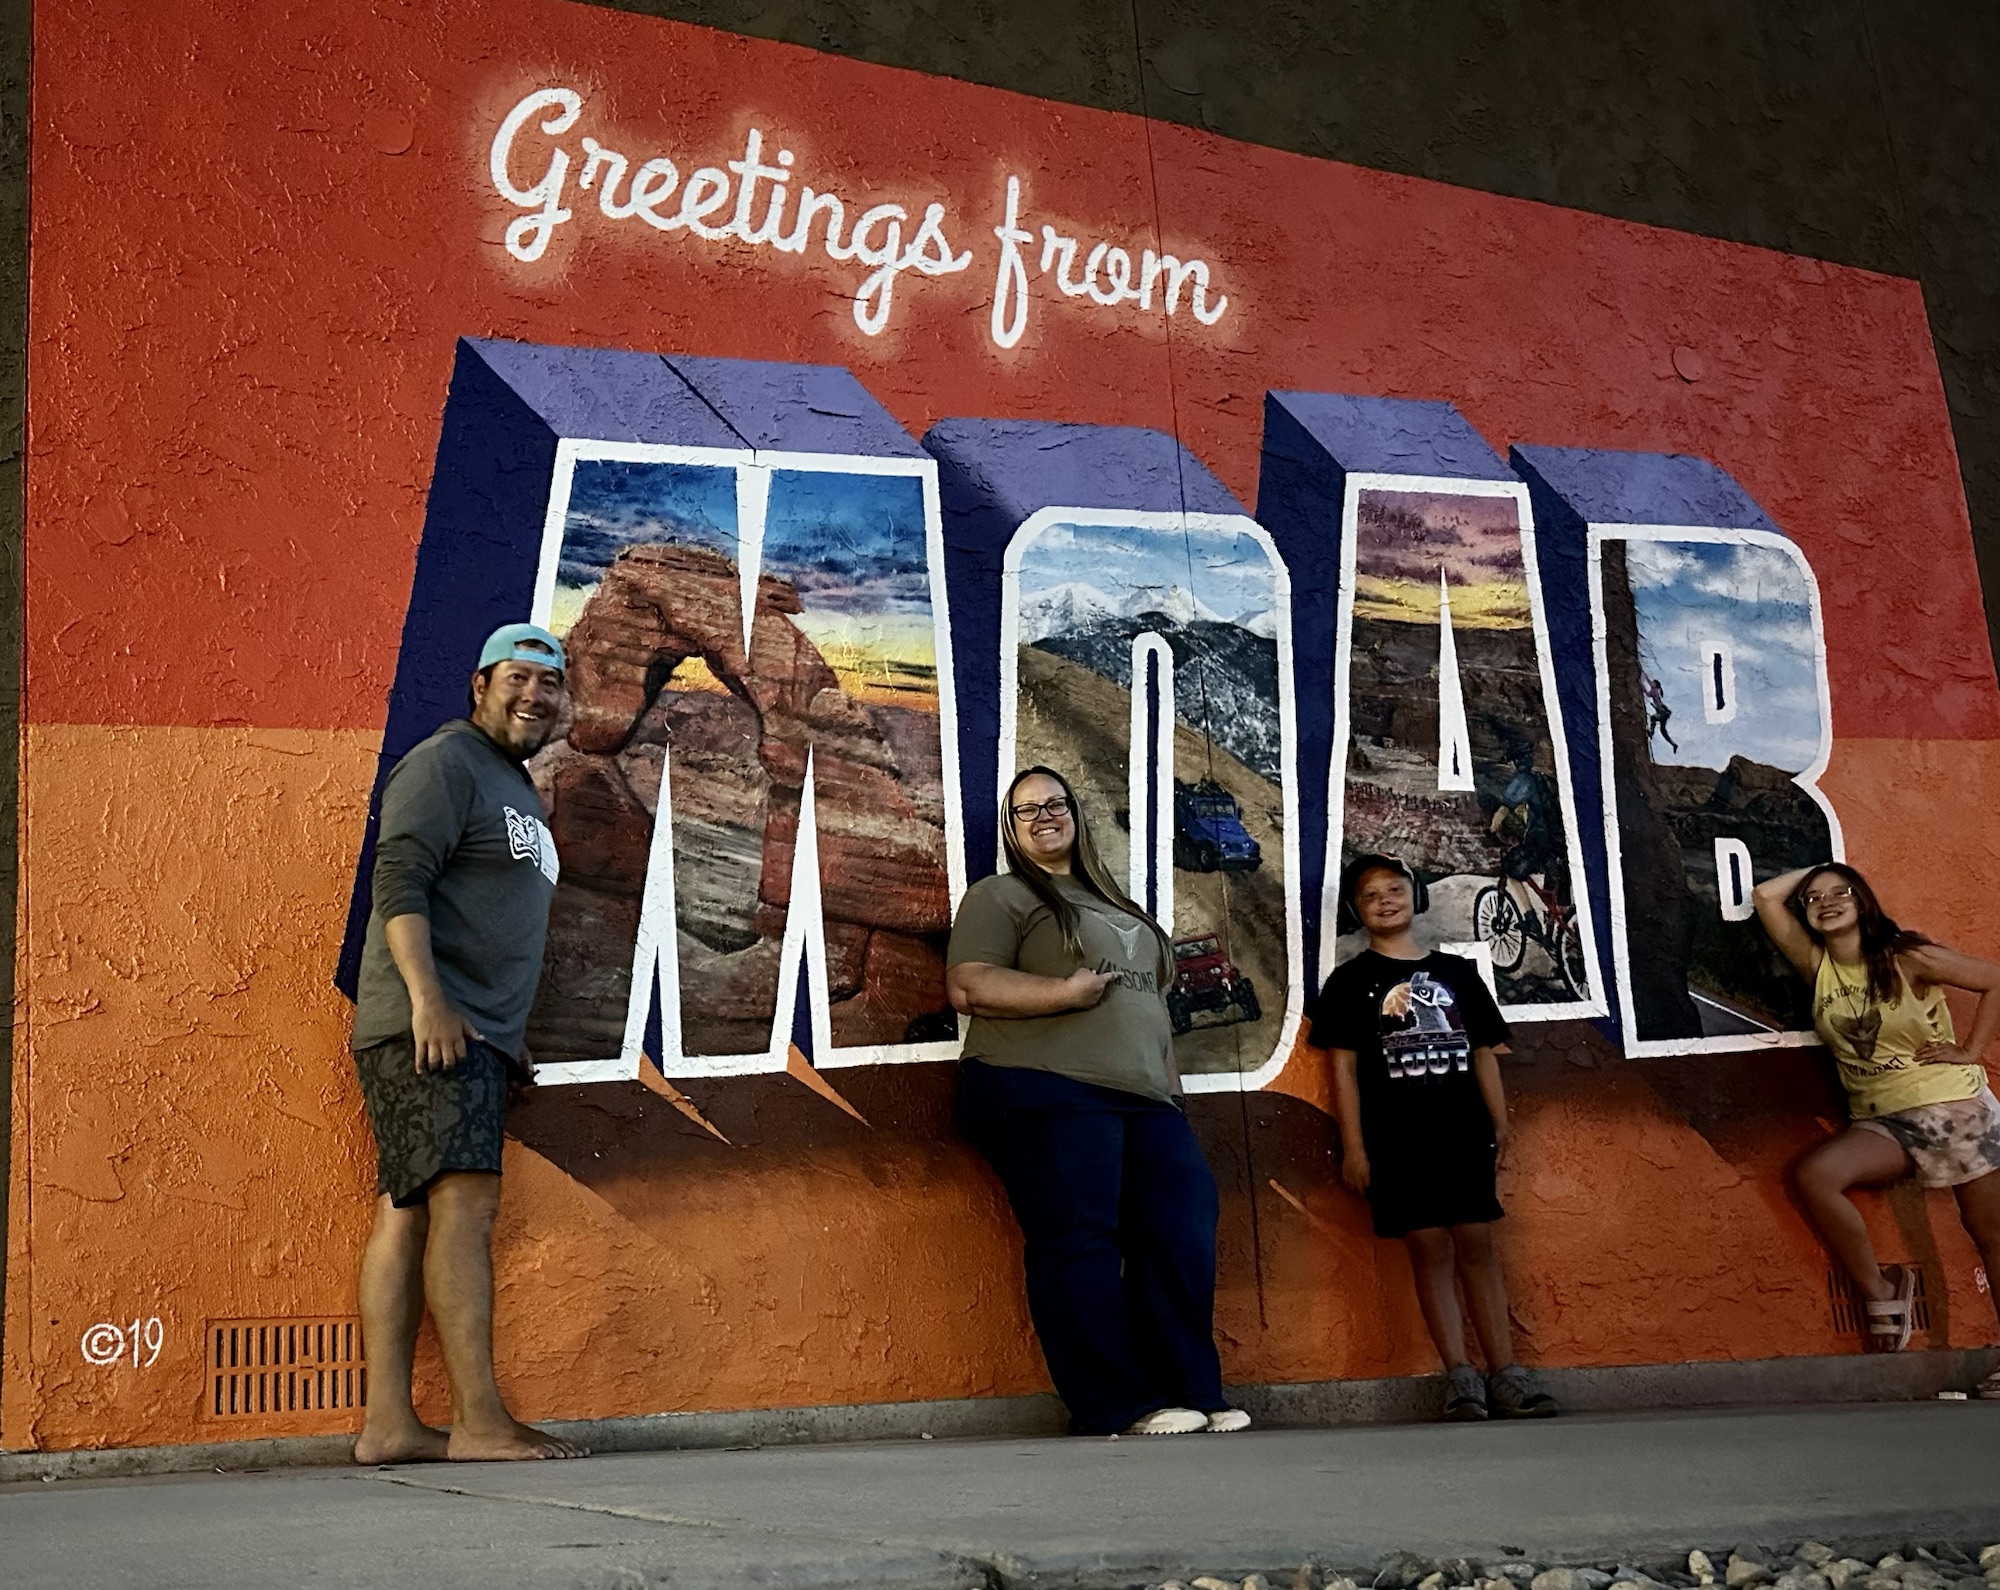 A family stands in front of a mural that says Greetings from Moab